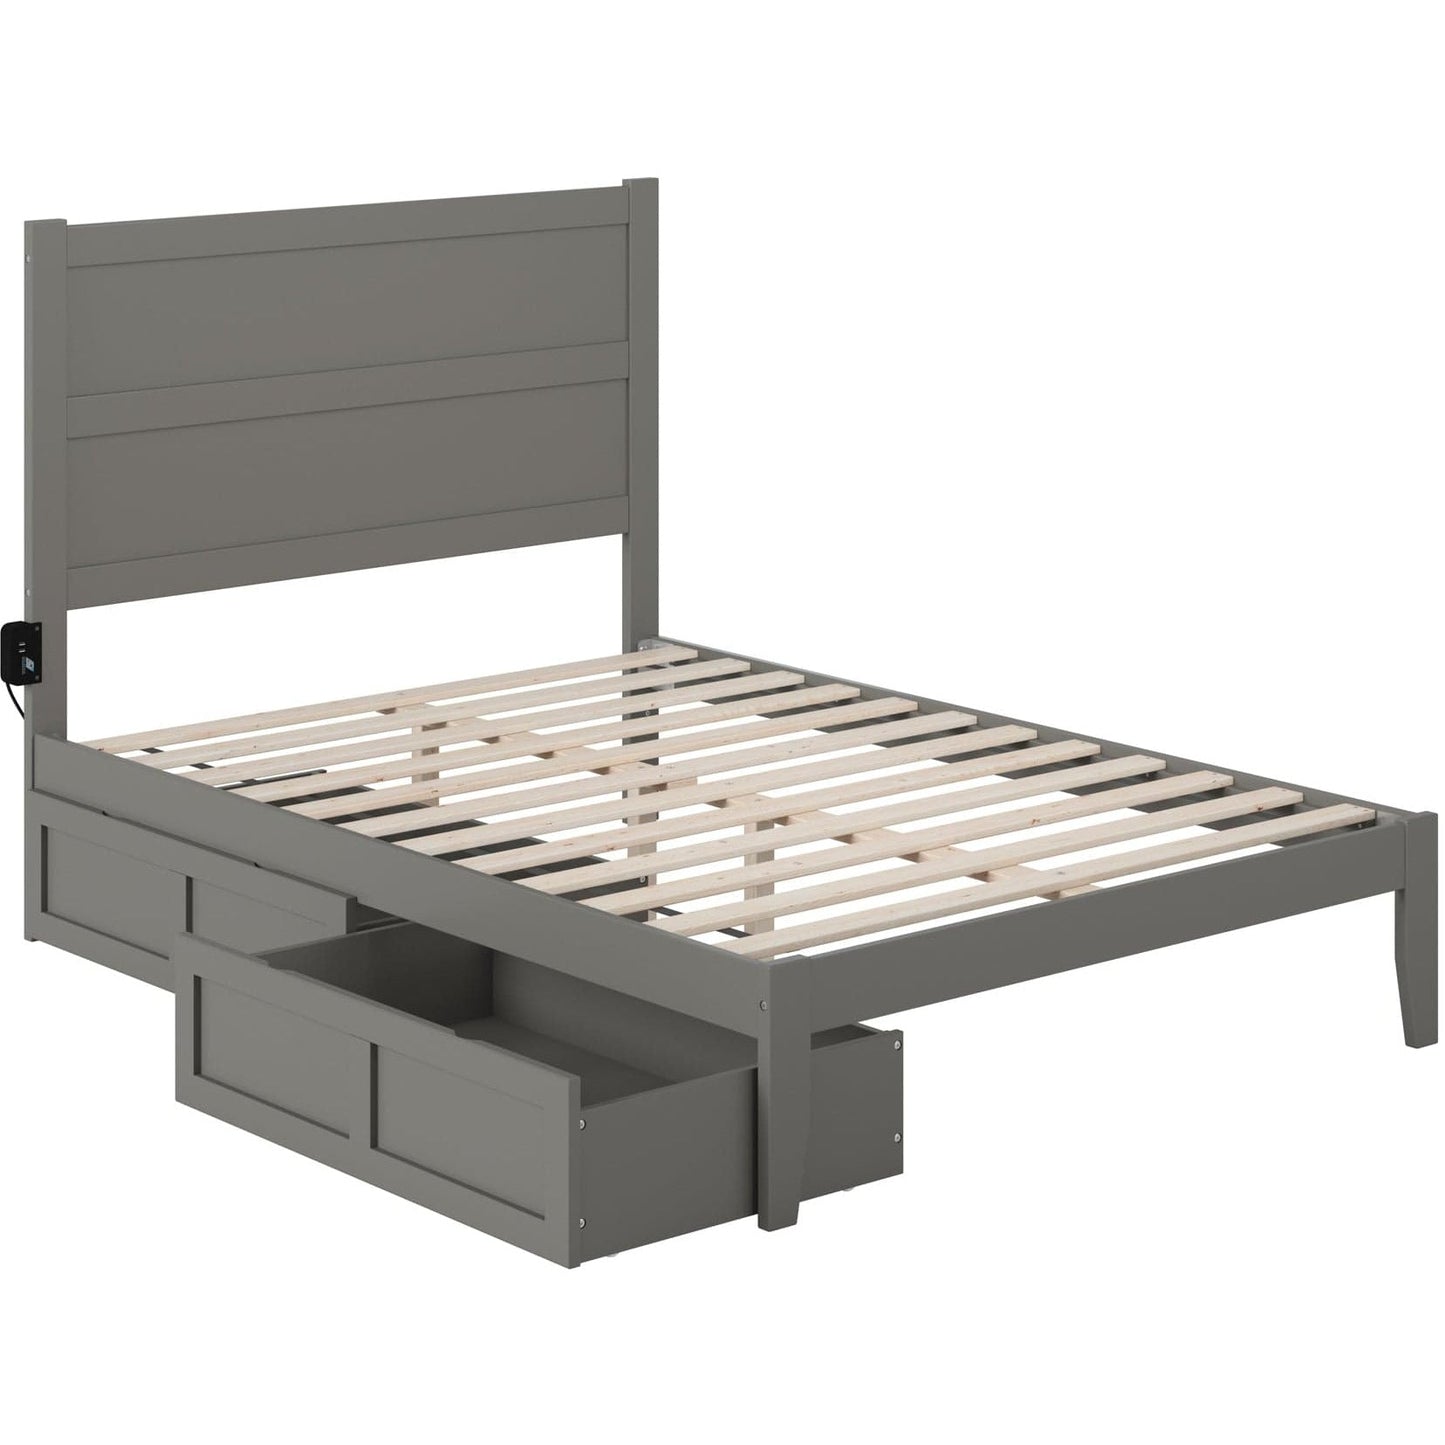 AFI Furnishings NoHo Full Bed with 2 Drawers in Grey AG9113339